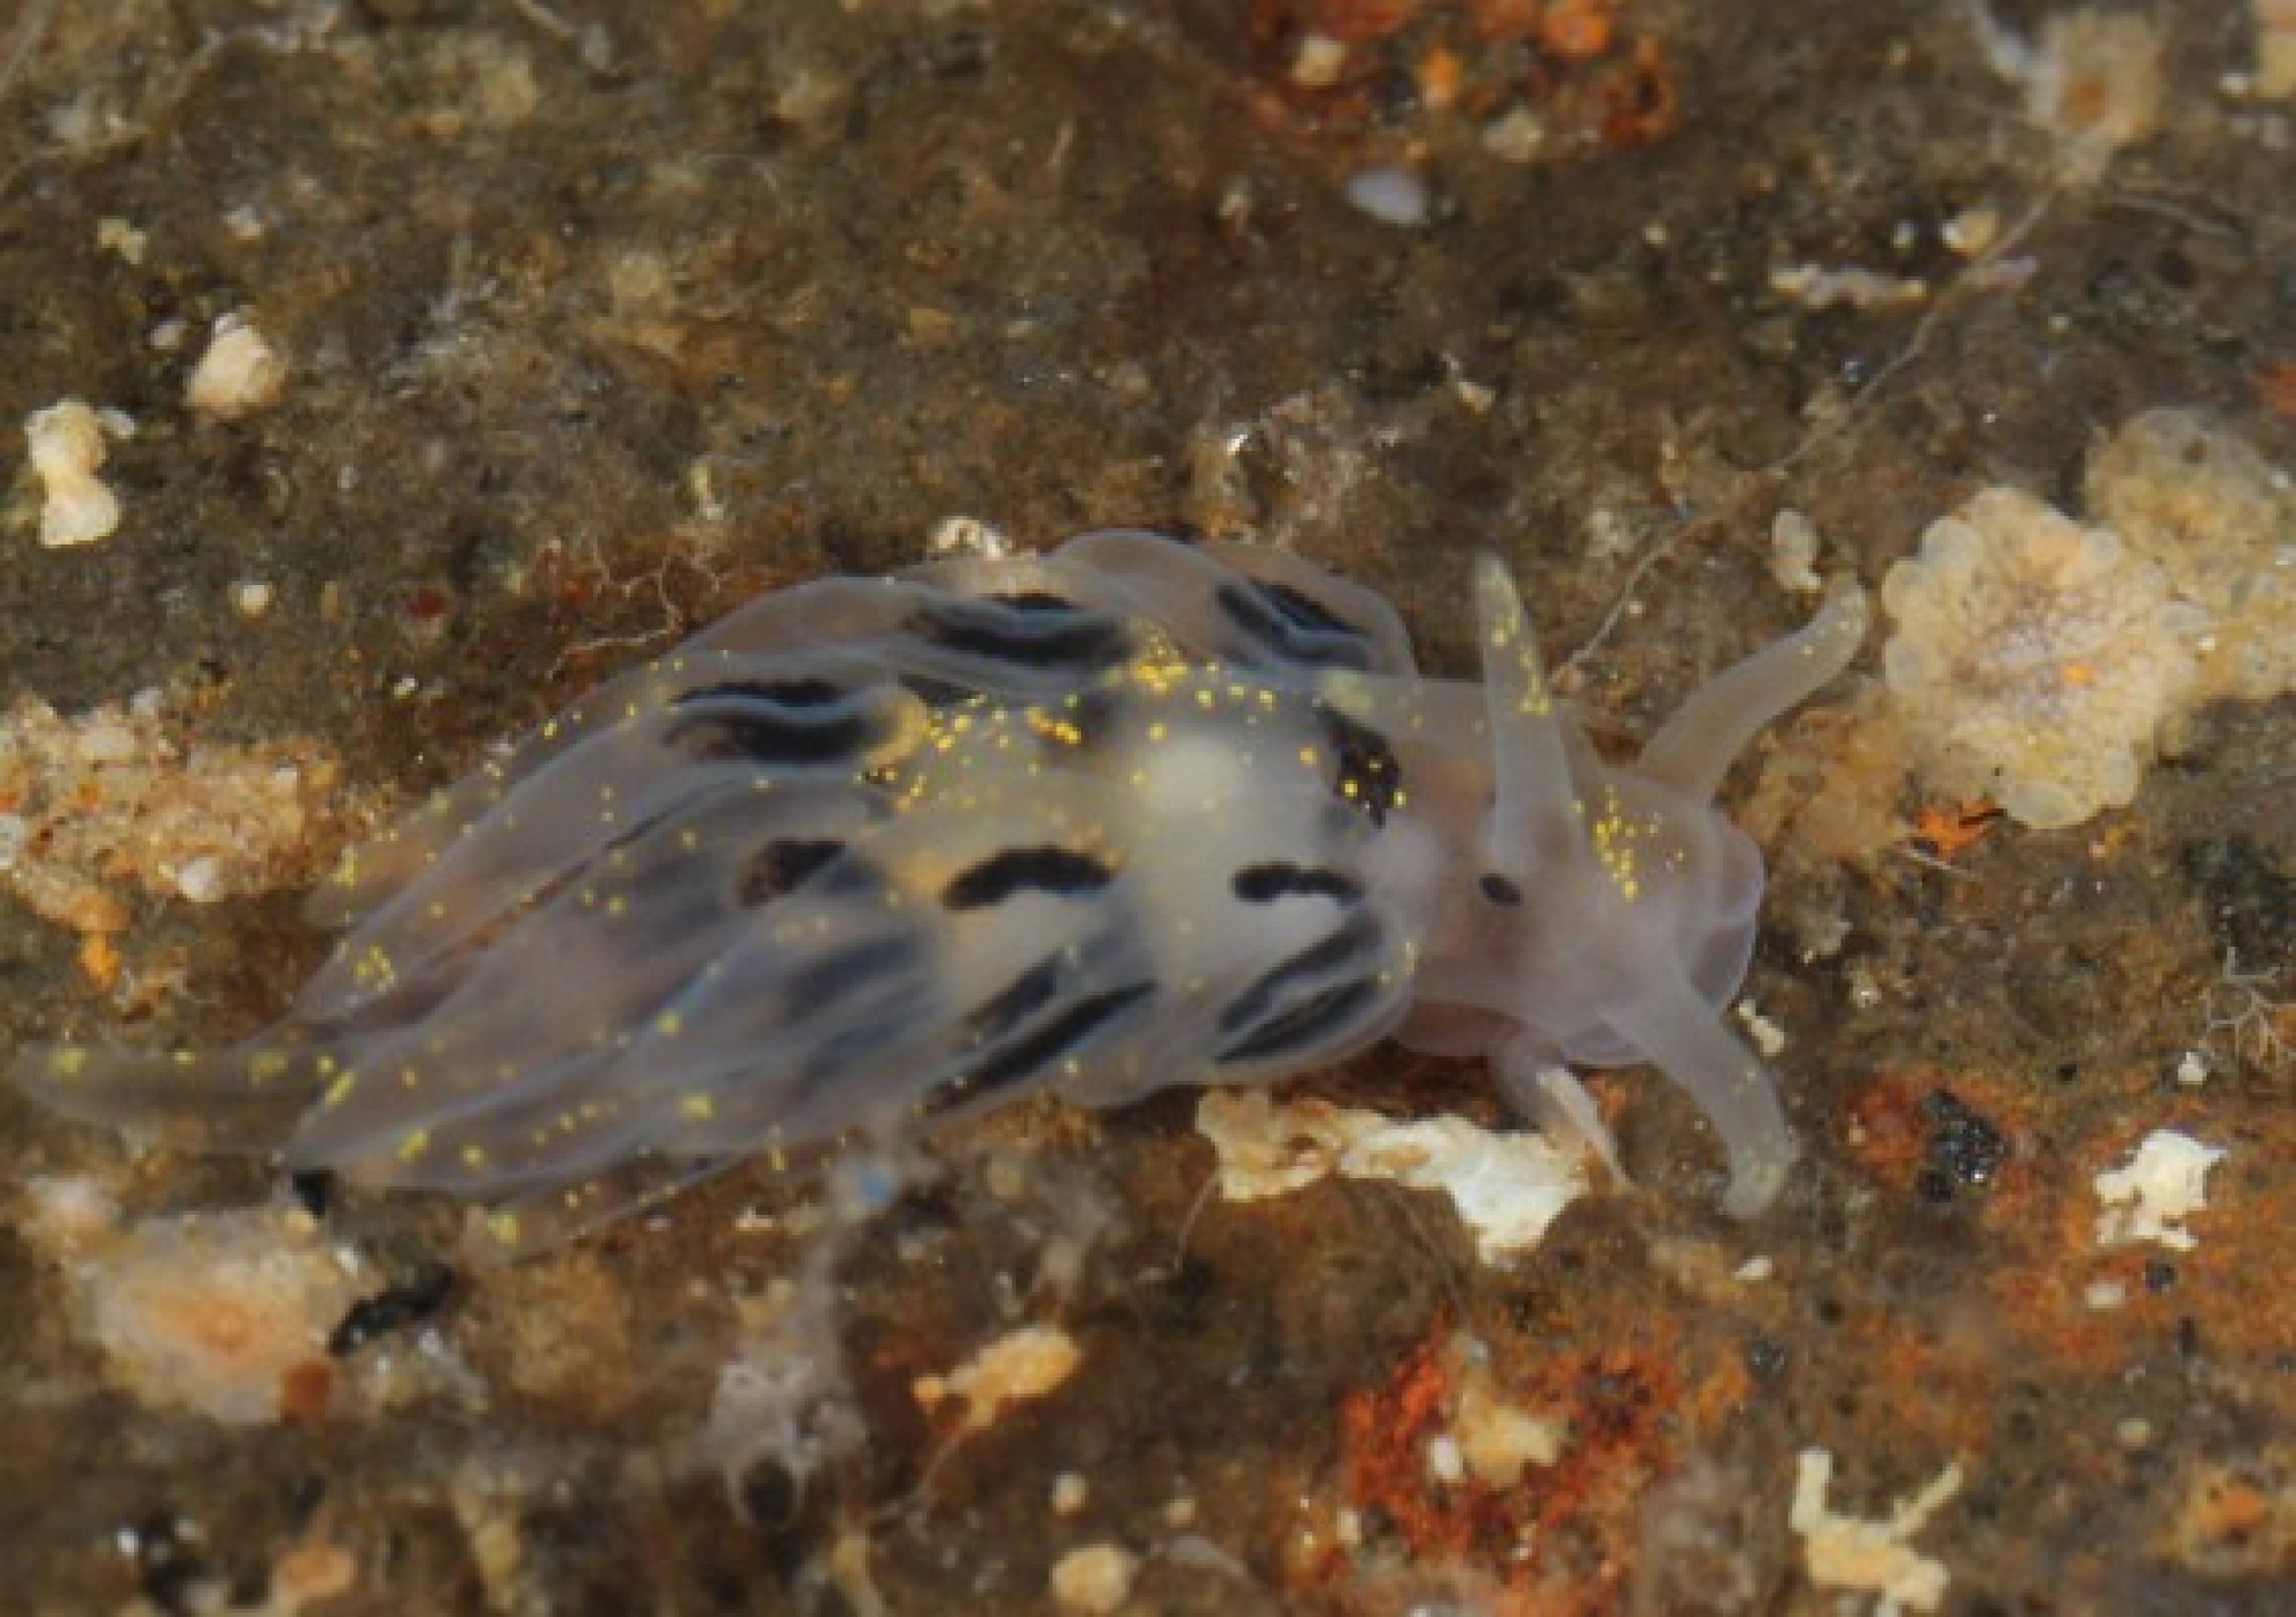 A new species of Favorinus that feeds on the eggs of other nudibranchs